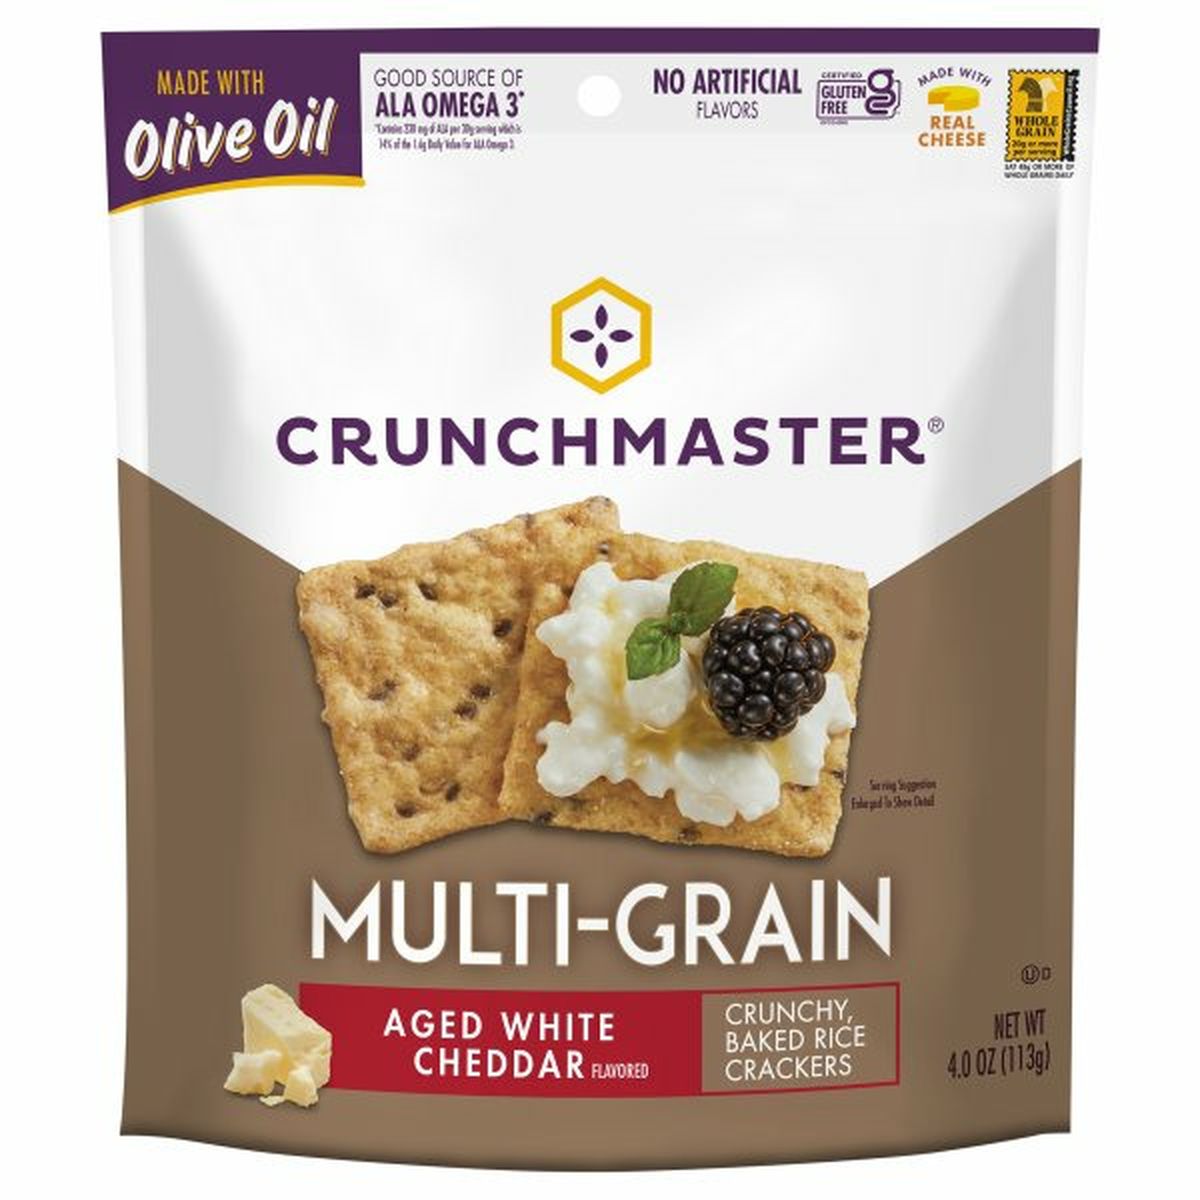 Calories in Crunchmaster Rice Crackers, Aged White Cheddar Flavored, Multi-Grain